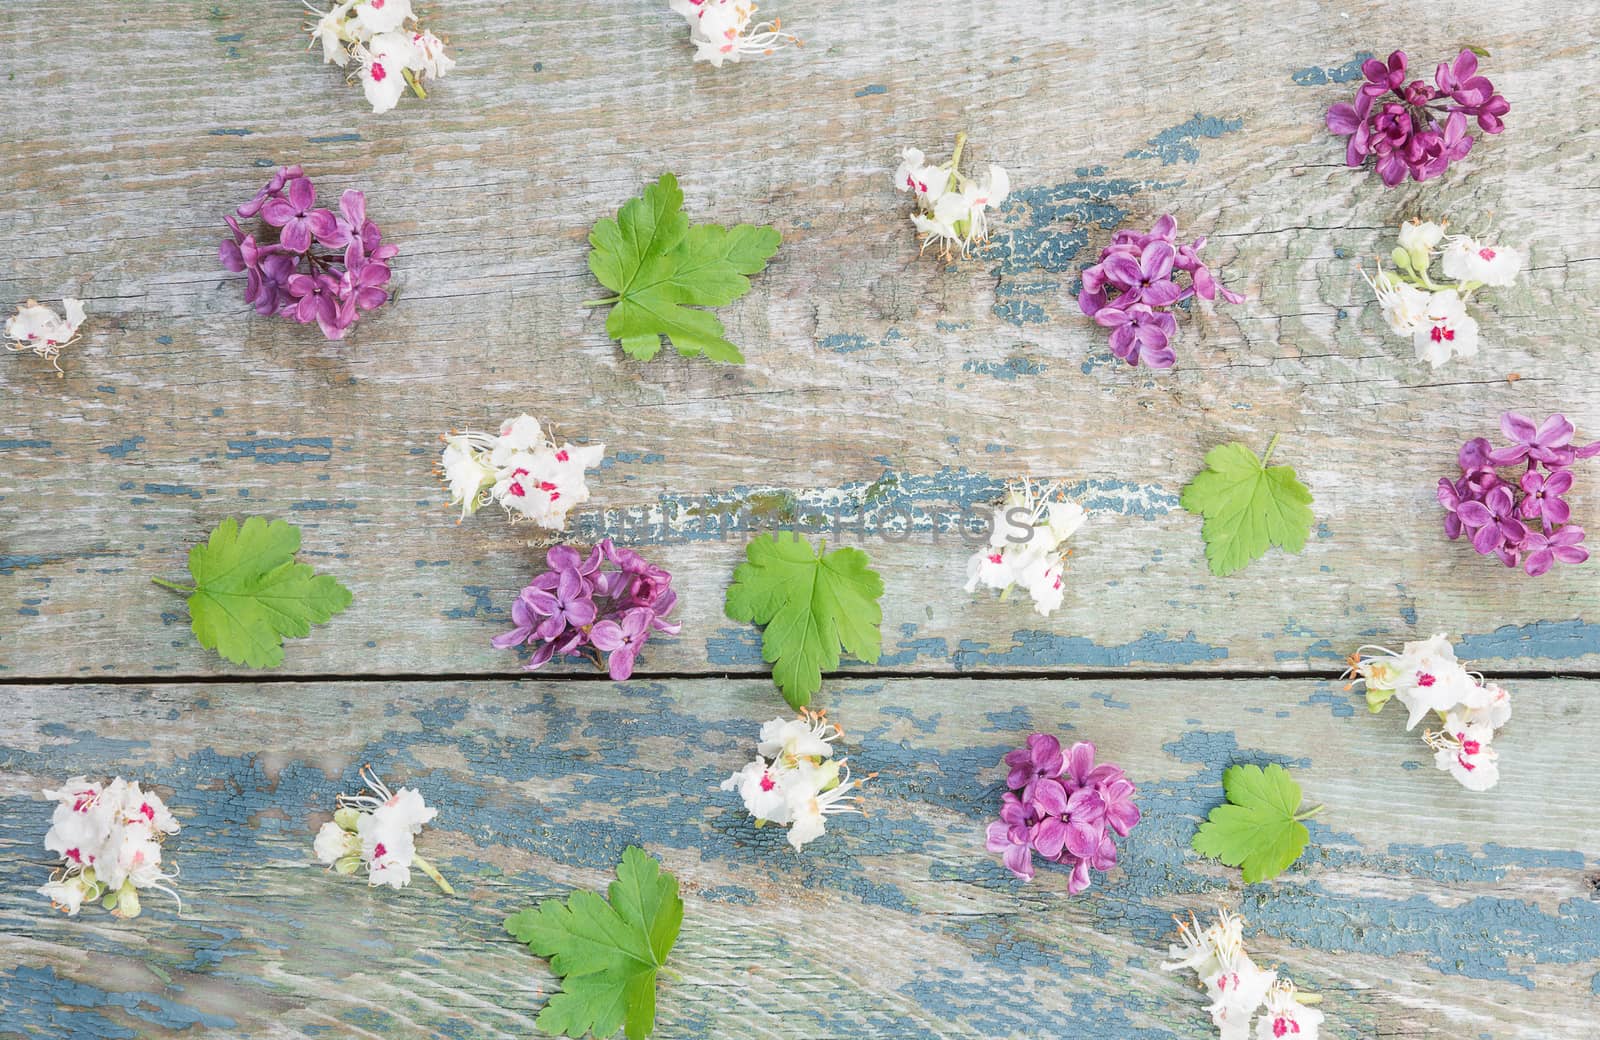 Different flowers on the wooden background by Epitavi